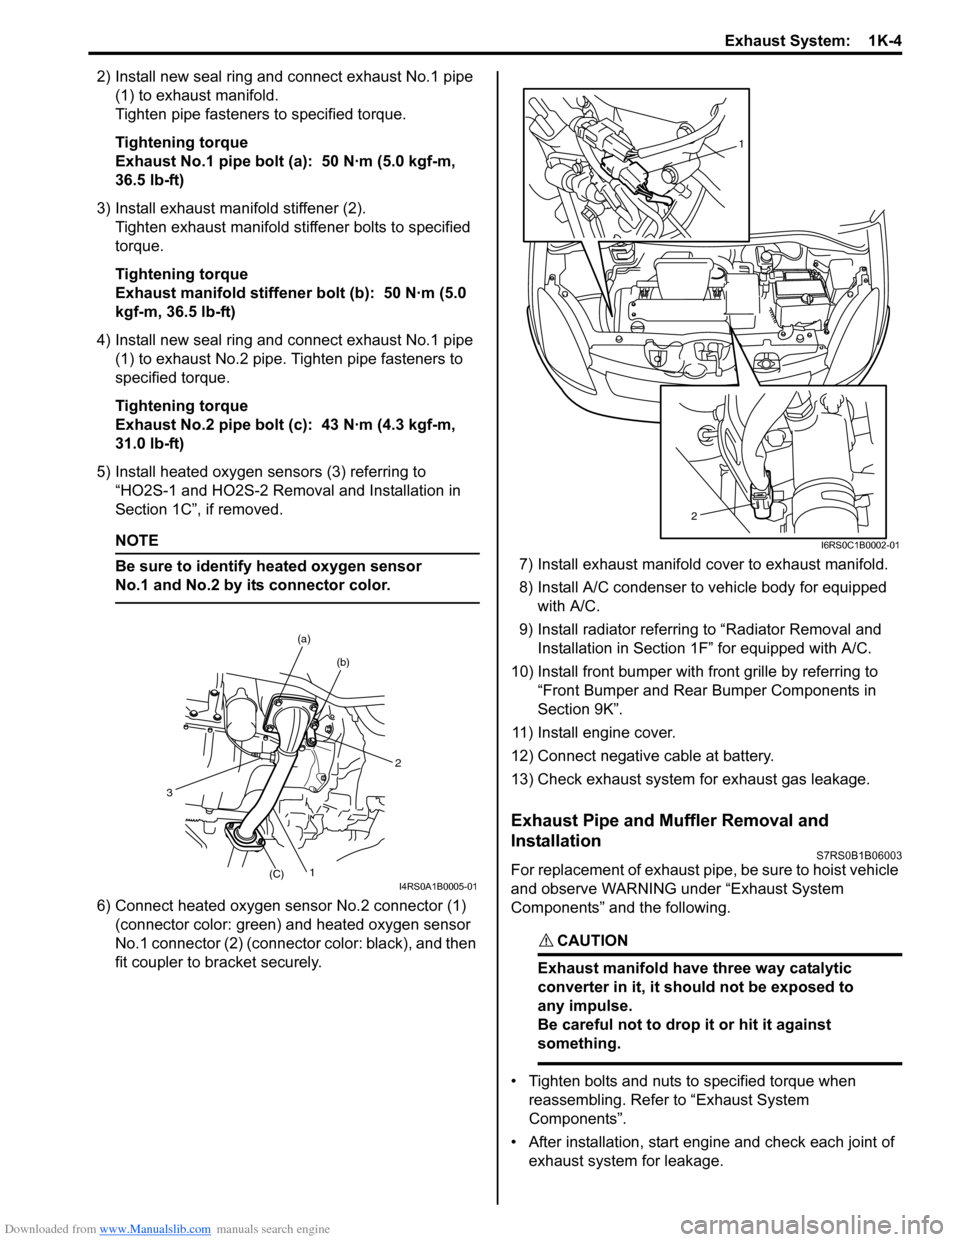 SUZUKI SWIFT 2007 2.G Service Service Manual Downloaded from www.Manualslib.com manuals search engine Exhaust System:  1K-4
2) Install new seal ring and connect exhaust No.1 pipe (1) to exhaust manifold.
Tighten pipe fasteners to specified torqu